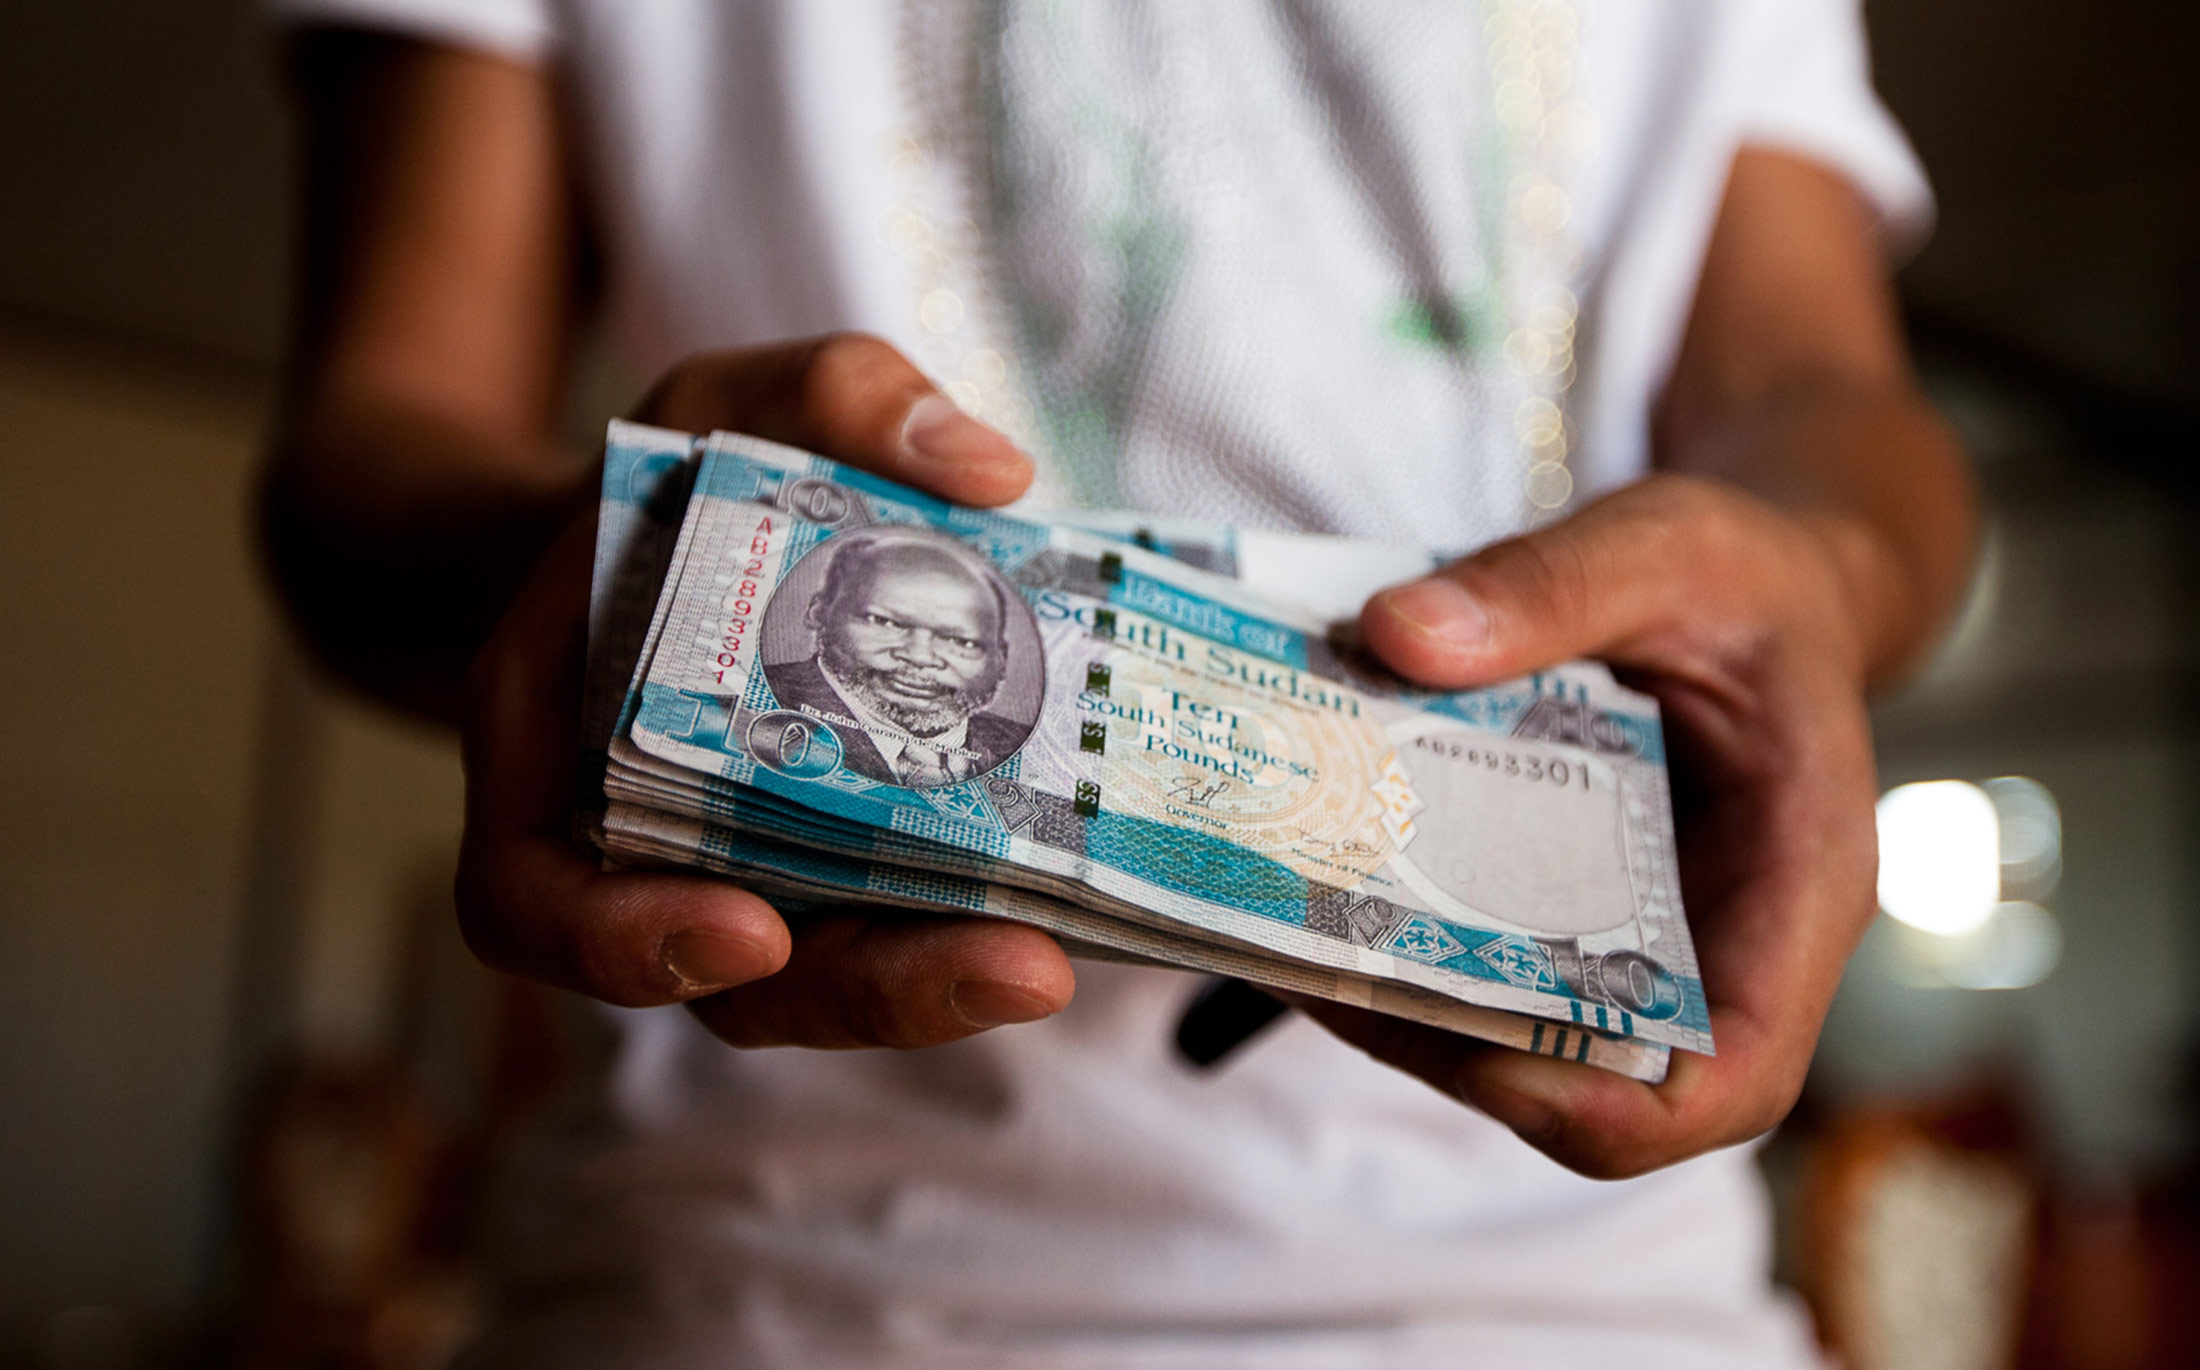 A man holds a stack of ten South Sudanese pound banknotes in South Sudan.
